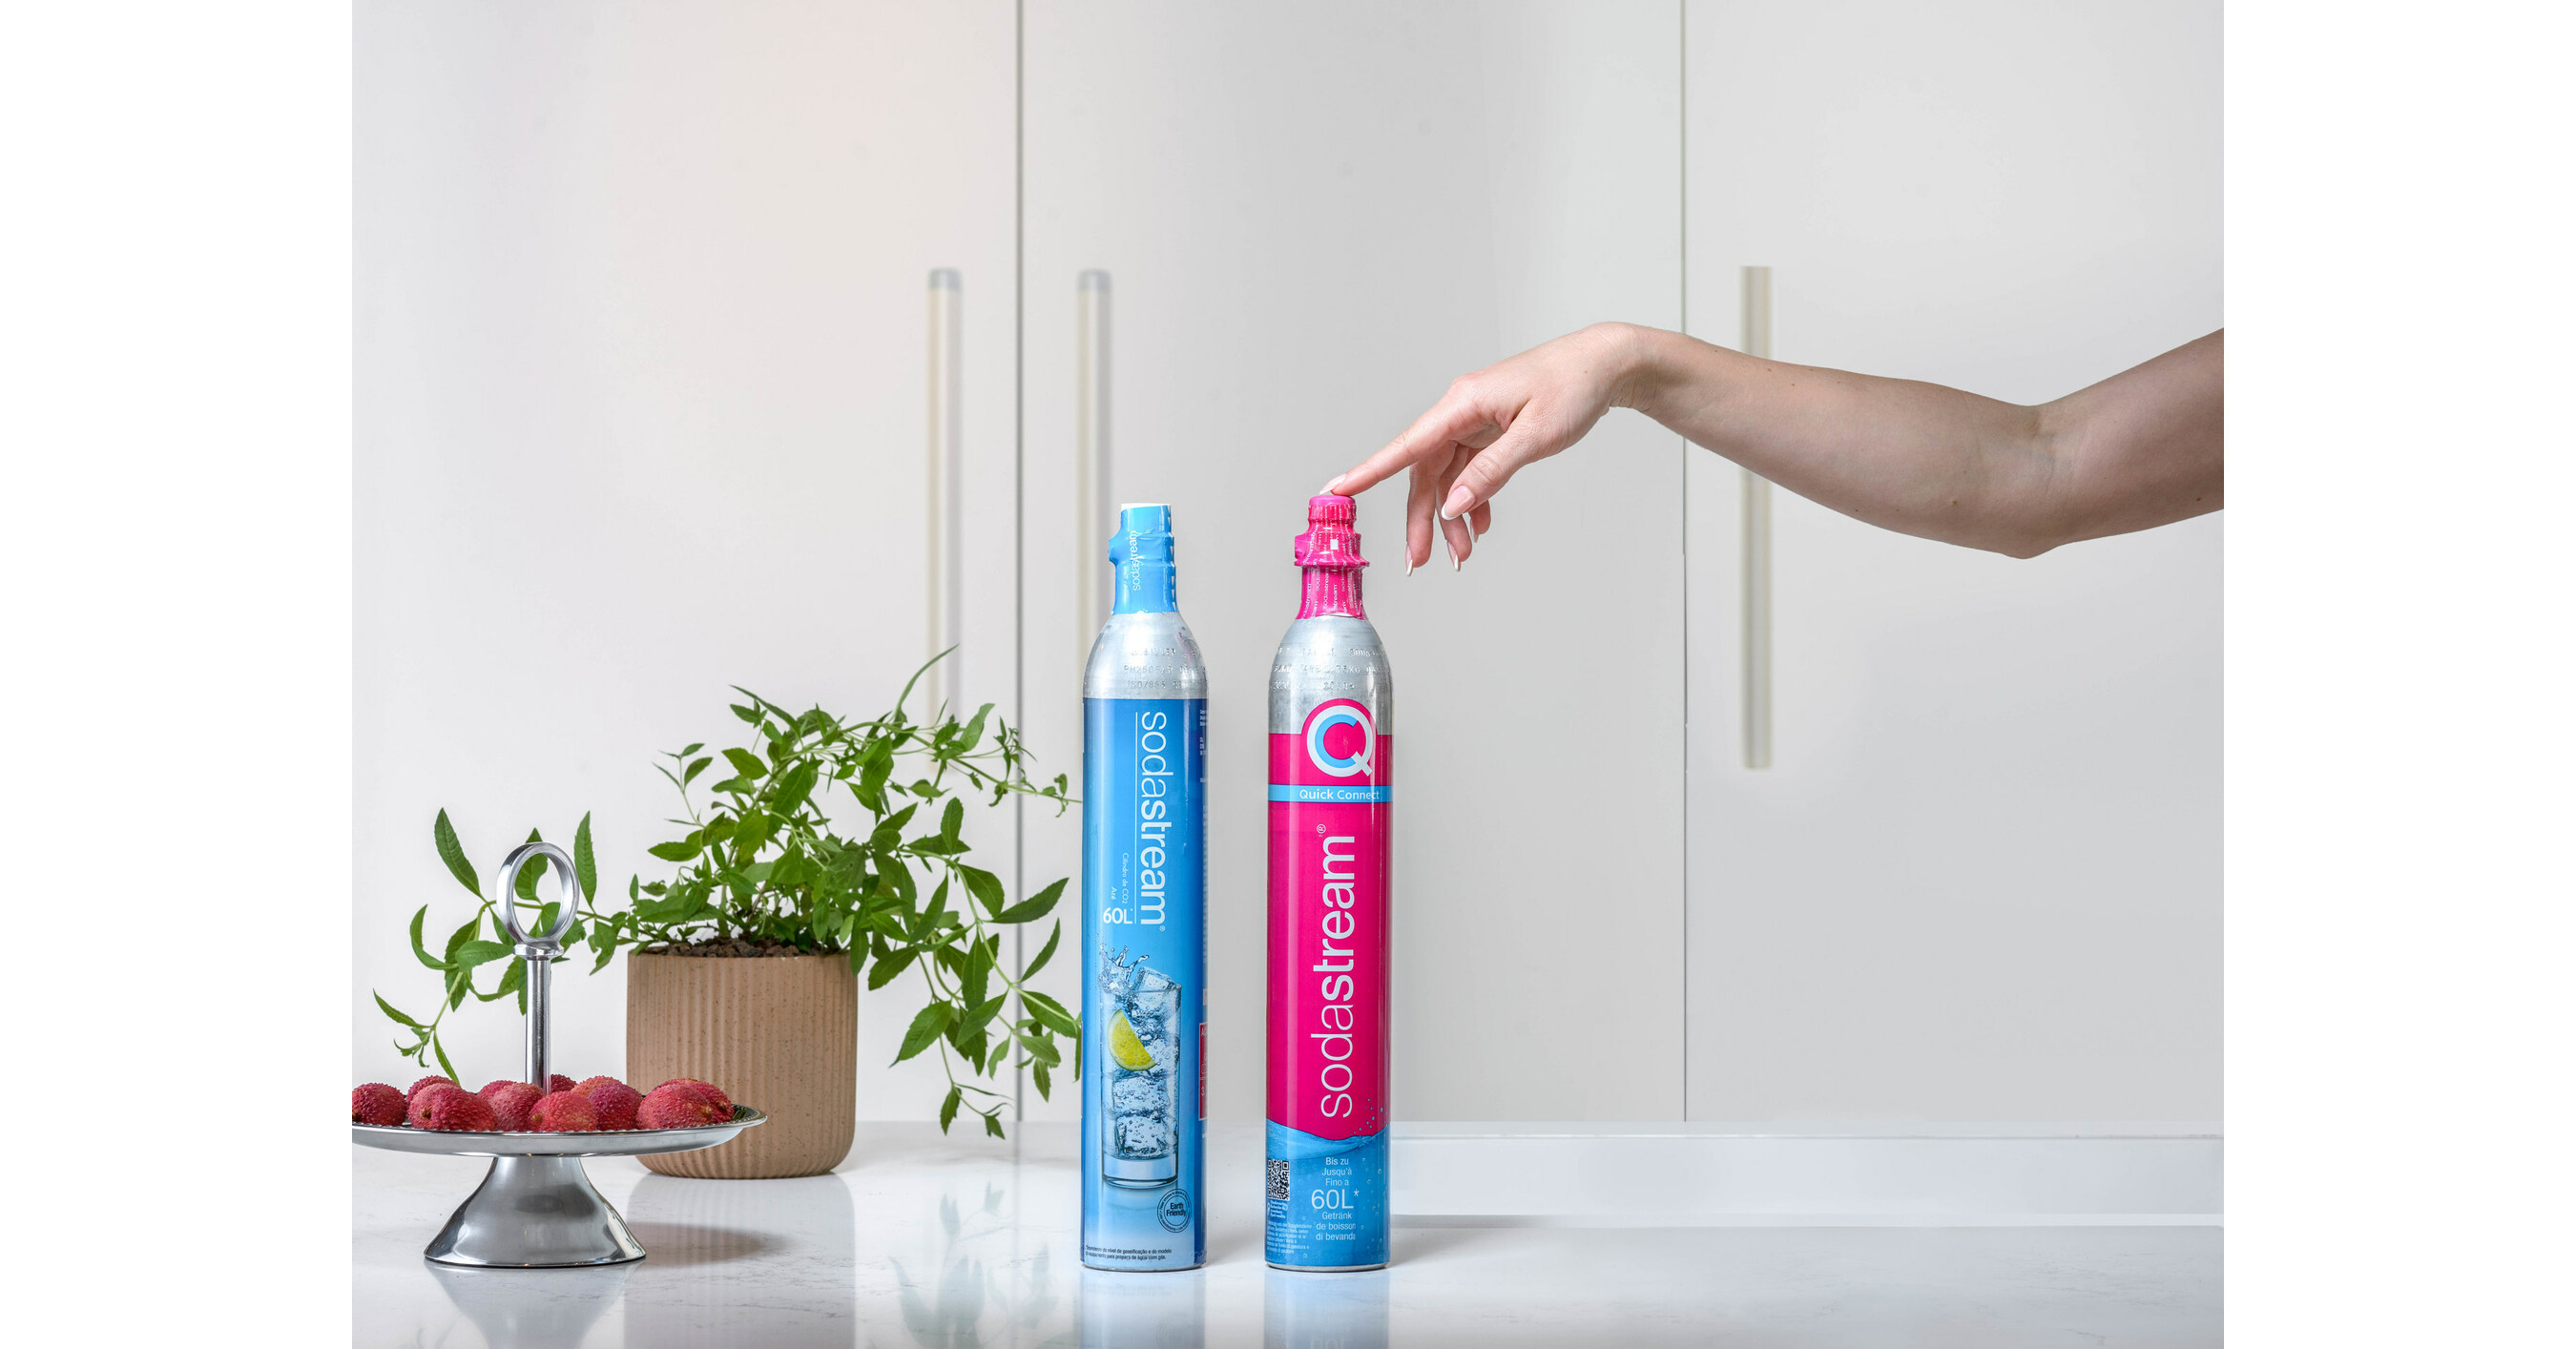 Pepsi's Foray Into The Home Carbonation Category With SodaStream: Sales  Results Come Into Focus (NASDAQ:PEP)